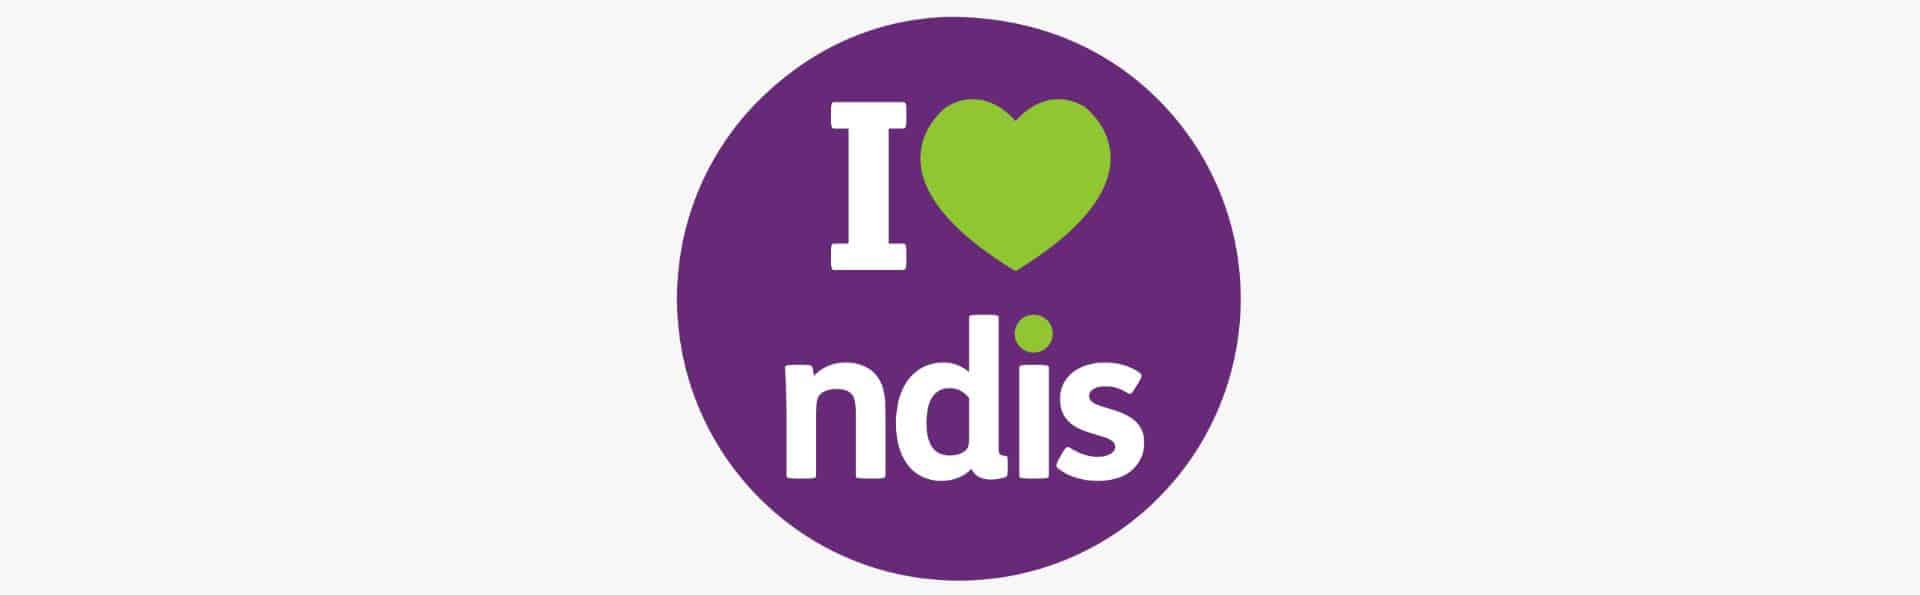 NDIS Information Session